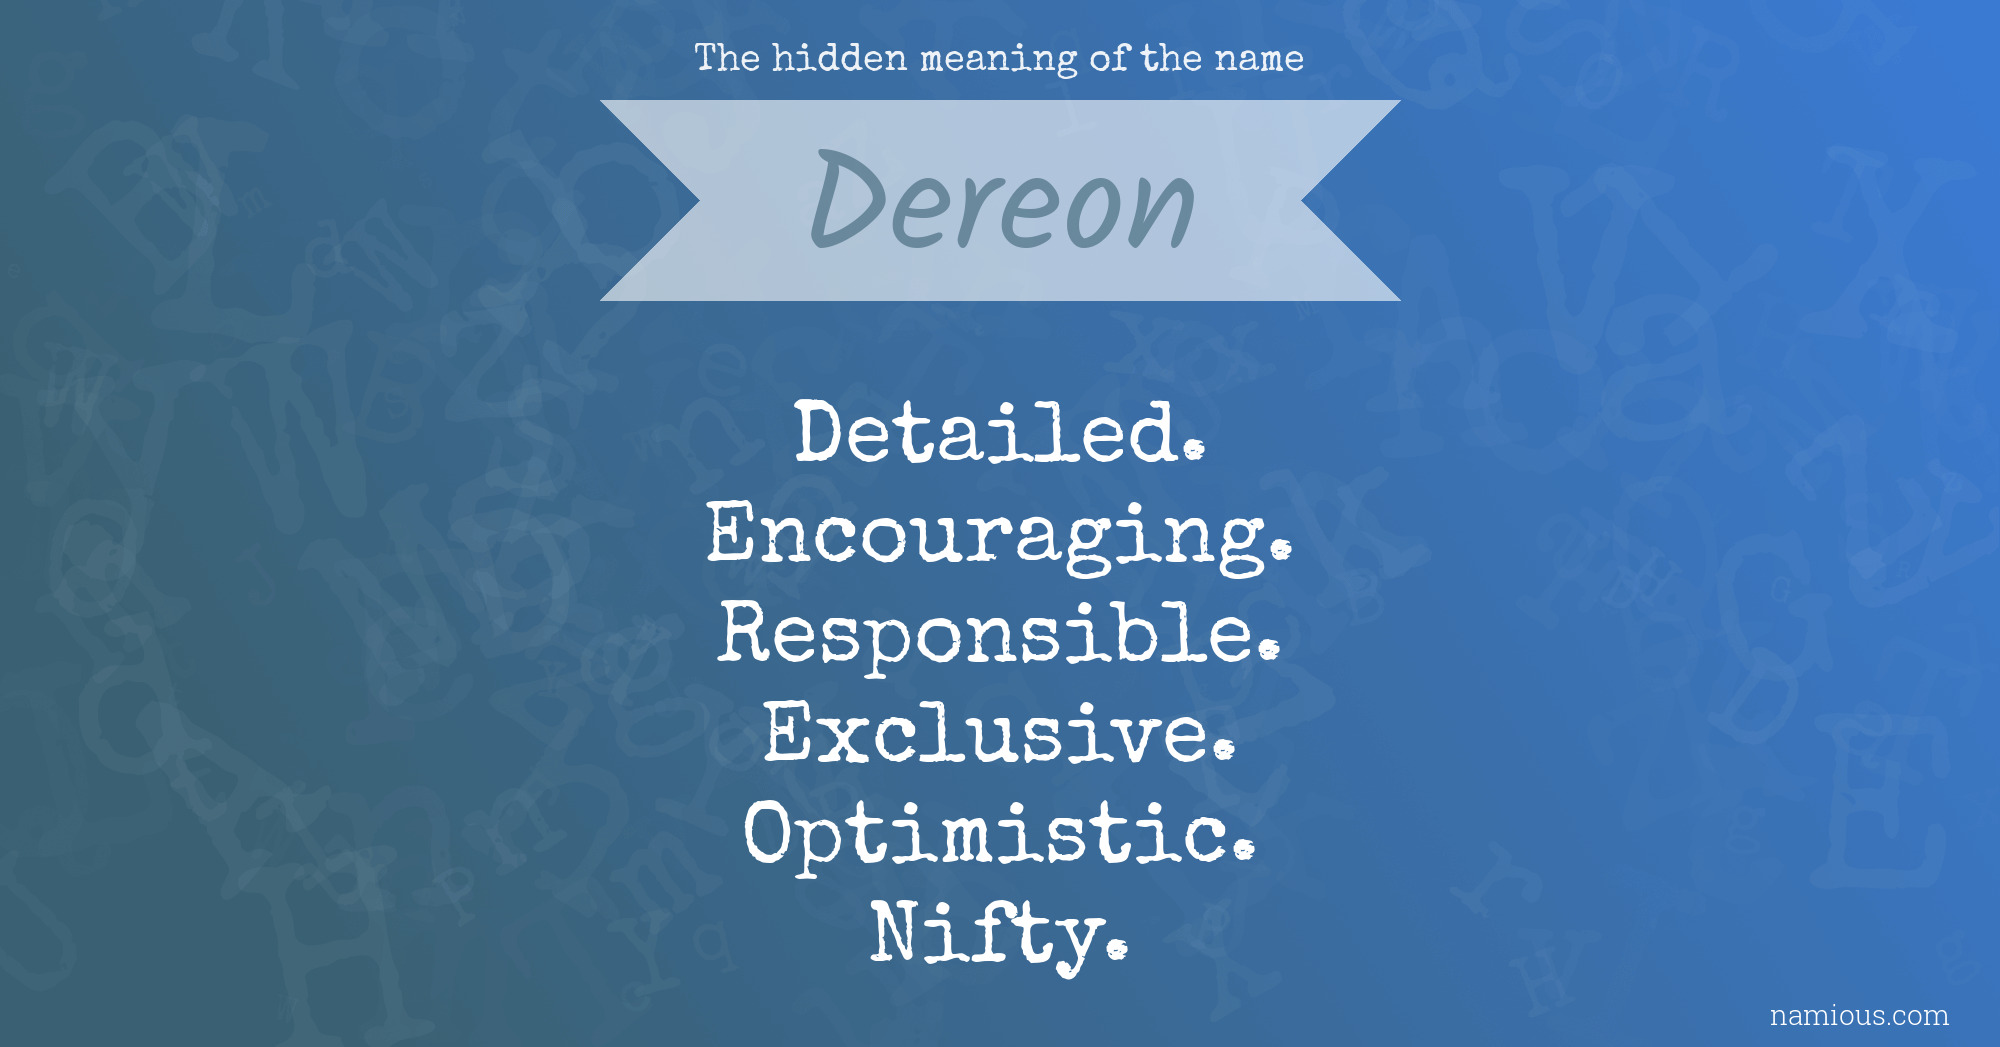 The hidden meaning of the name Dereon